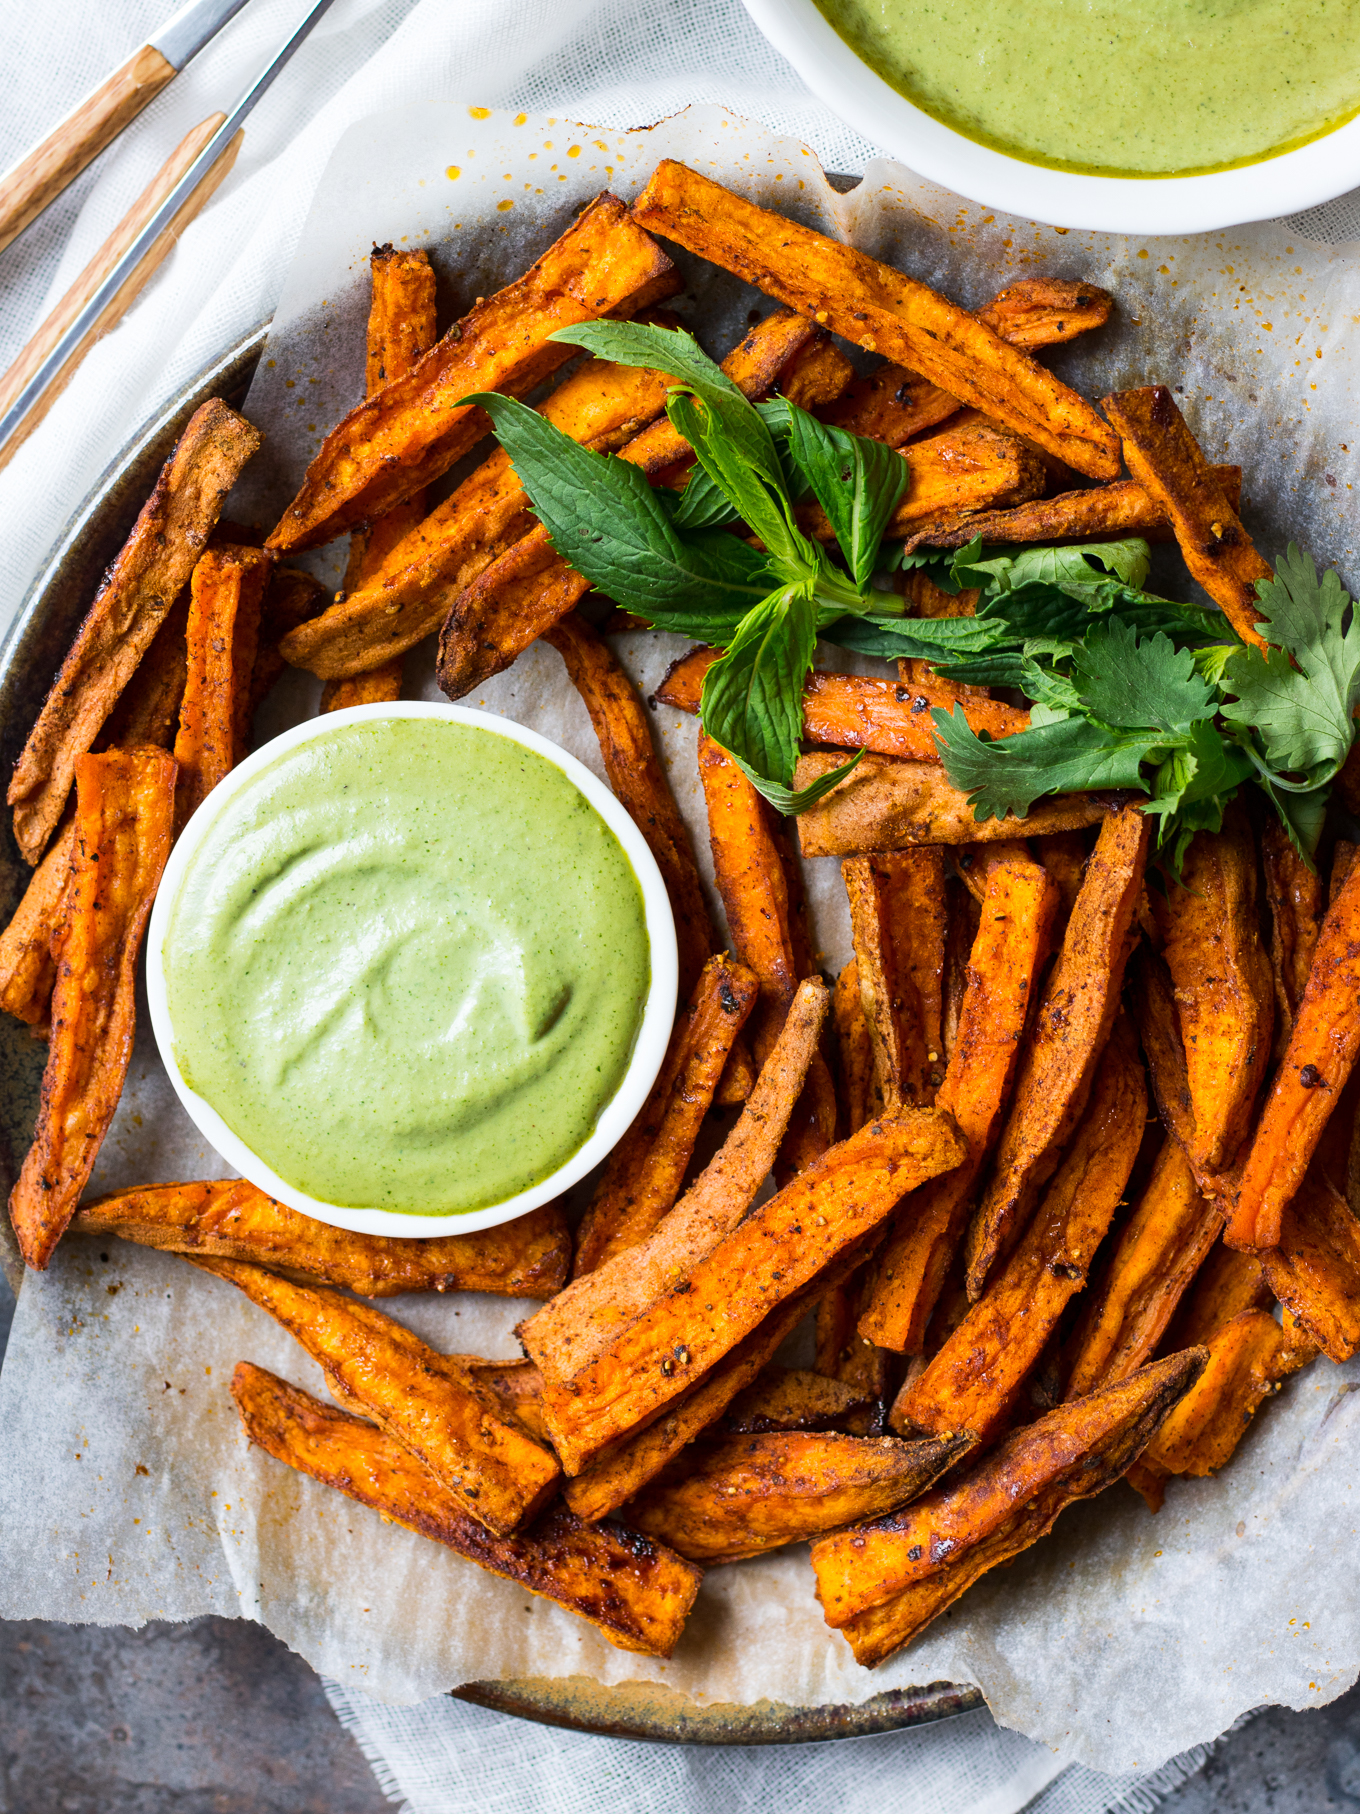 Cinnamon Paprika Sweet Potato Fries arranged on plate with green herb dipping sauce.